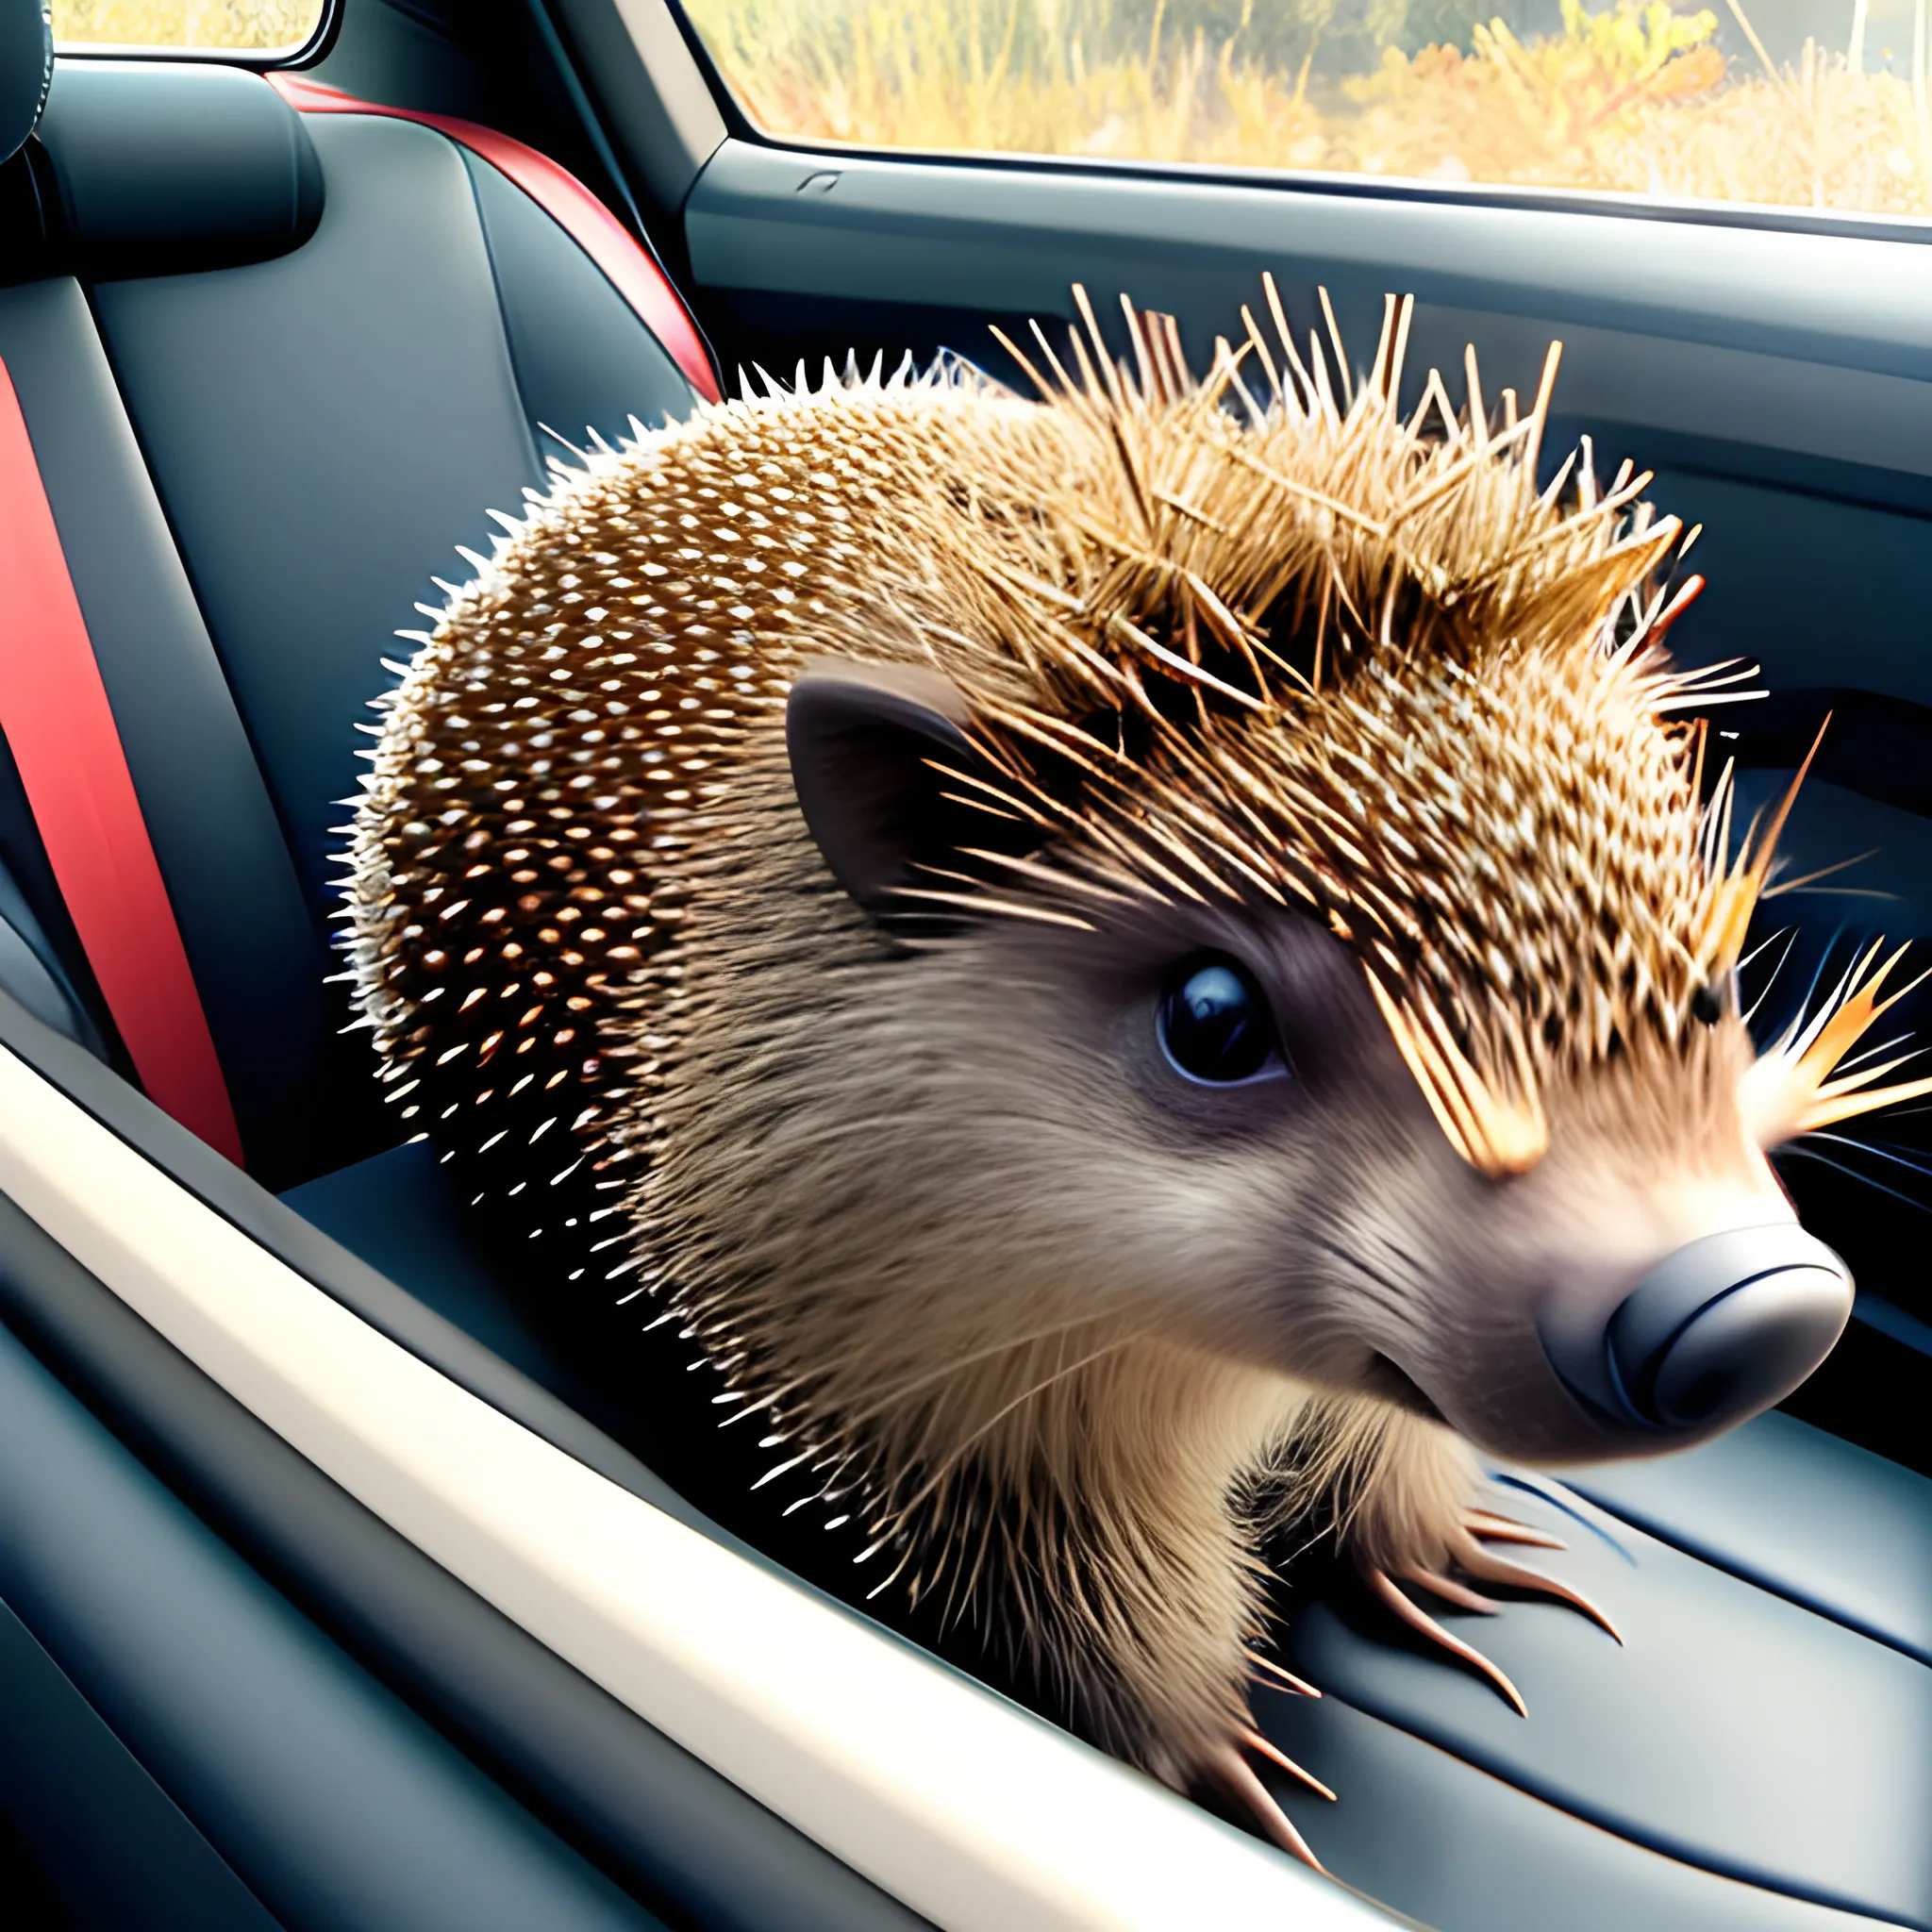 A cute, friendly, realistic porcupine riding in a car to New Hampshire